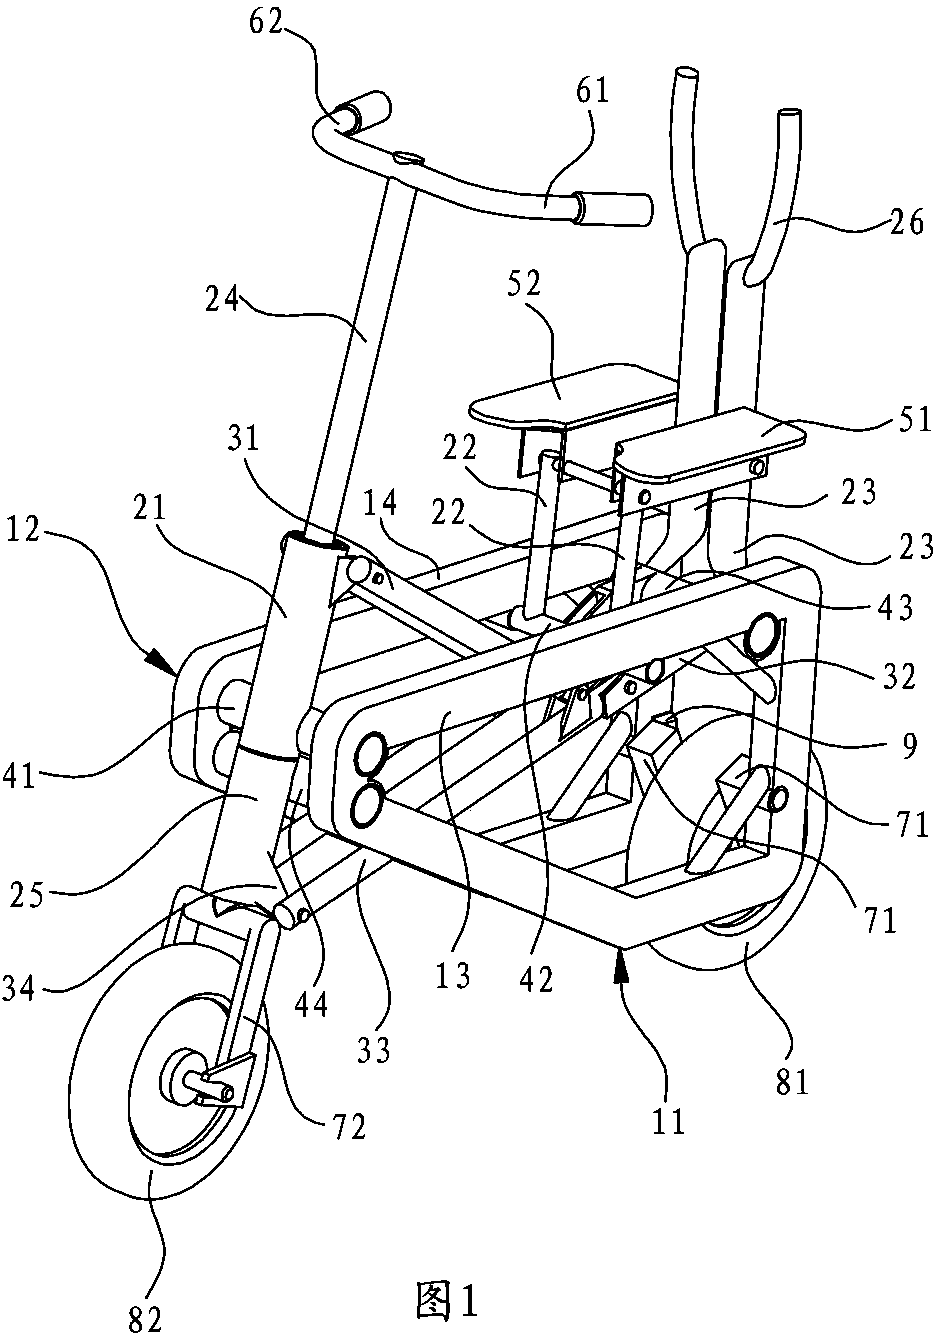 One-step folding bicycle